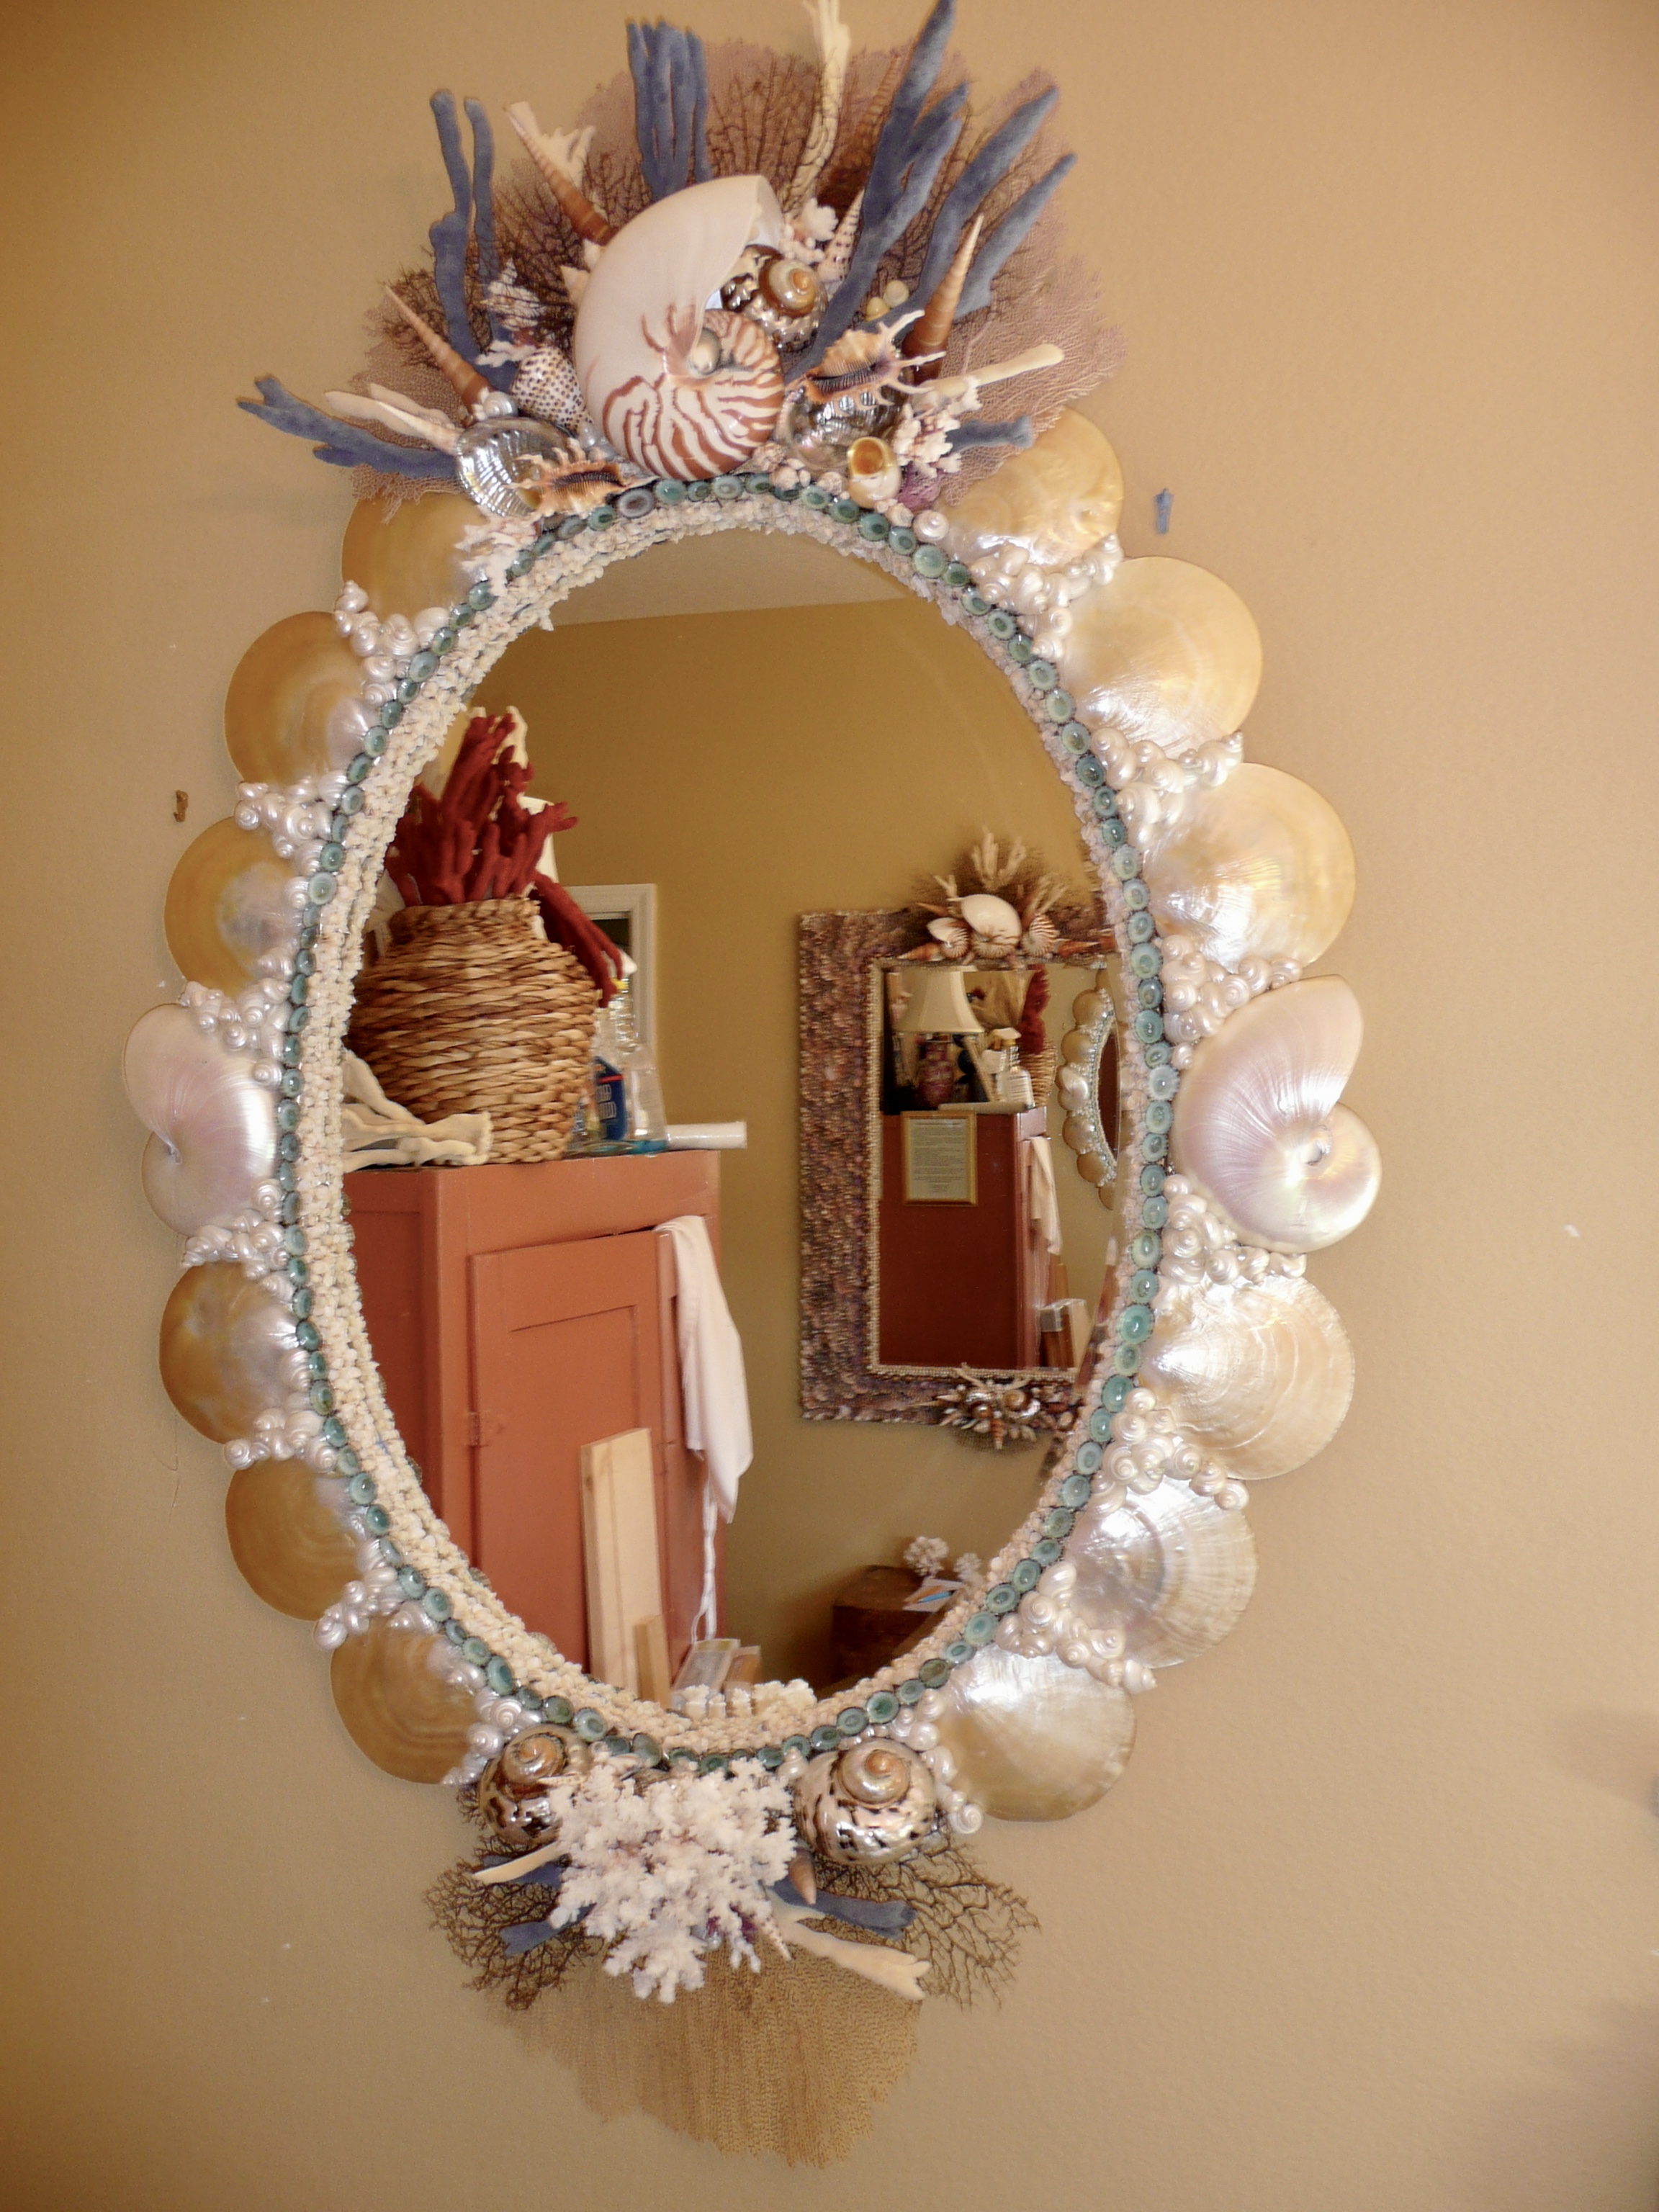 Oval mirror made with large mother of pearl shells is trimmed with row of small green shell on the inside edge. It reflects rust colored furniture and another shell mirror